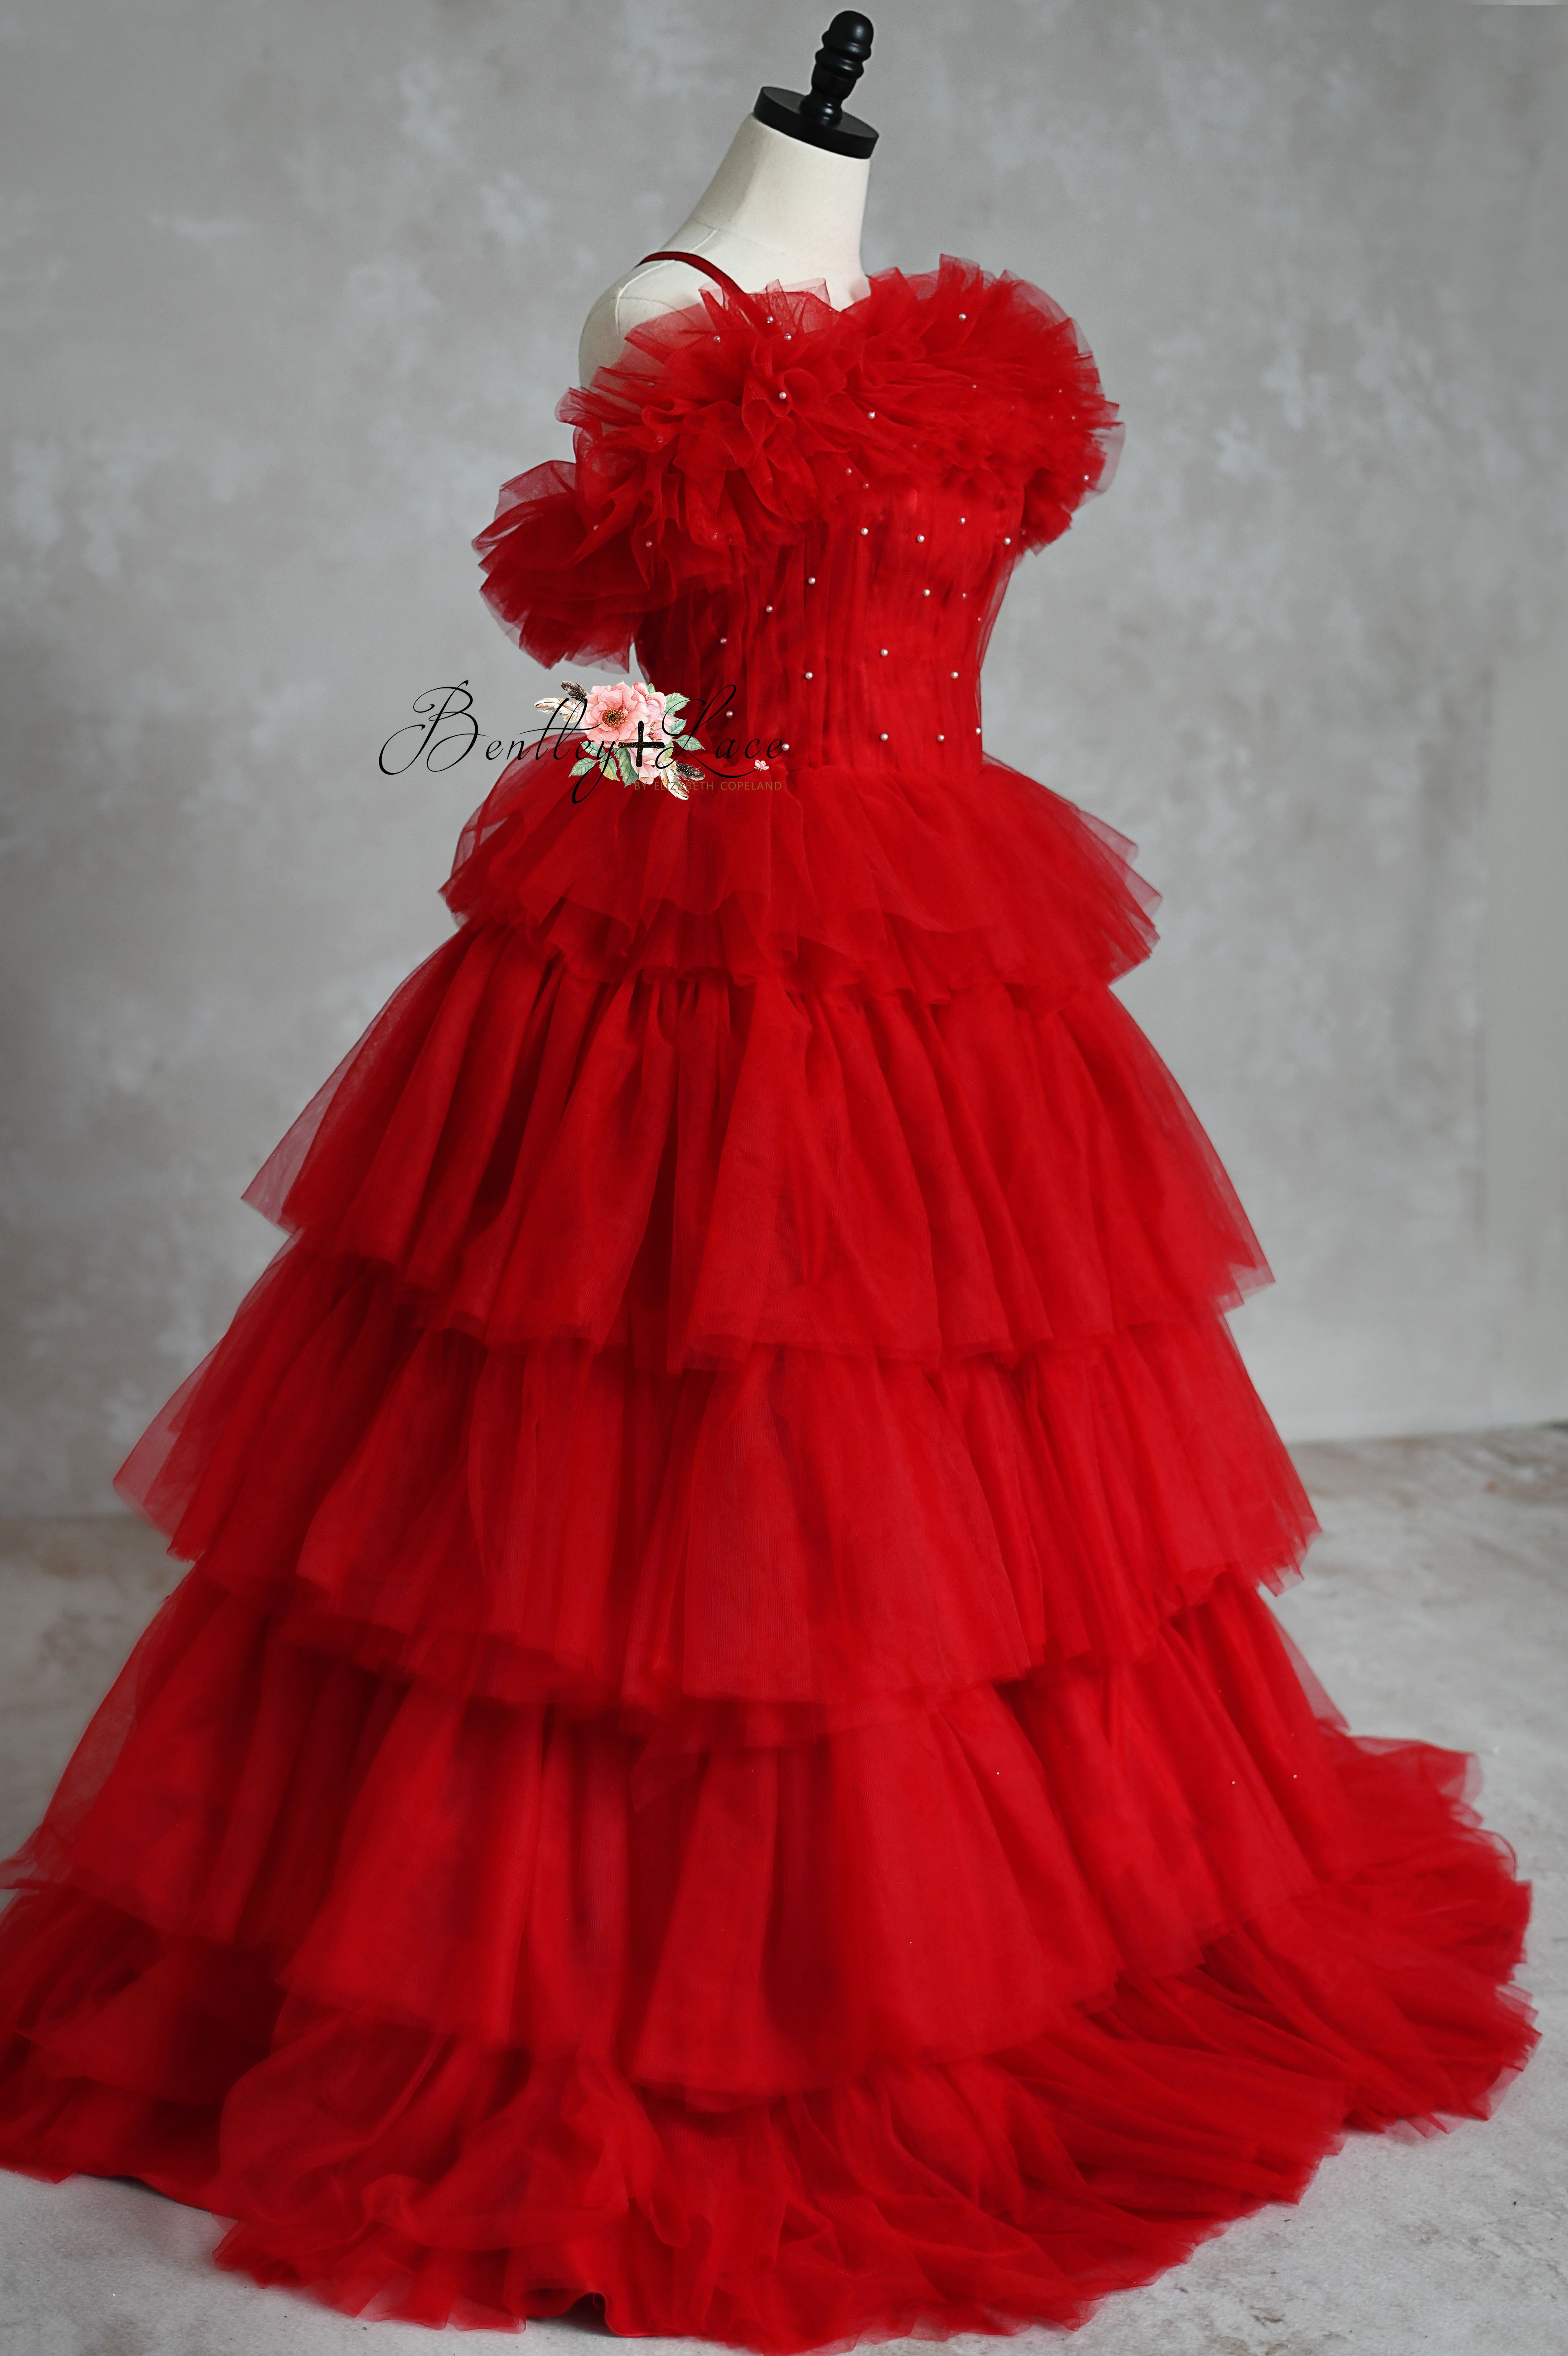 Custom red dress for Photography sessions